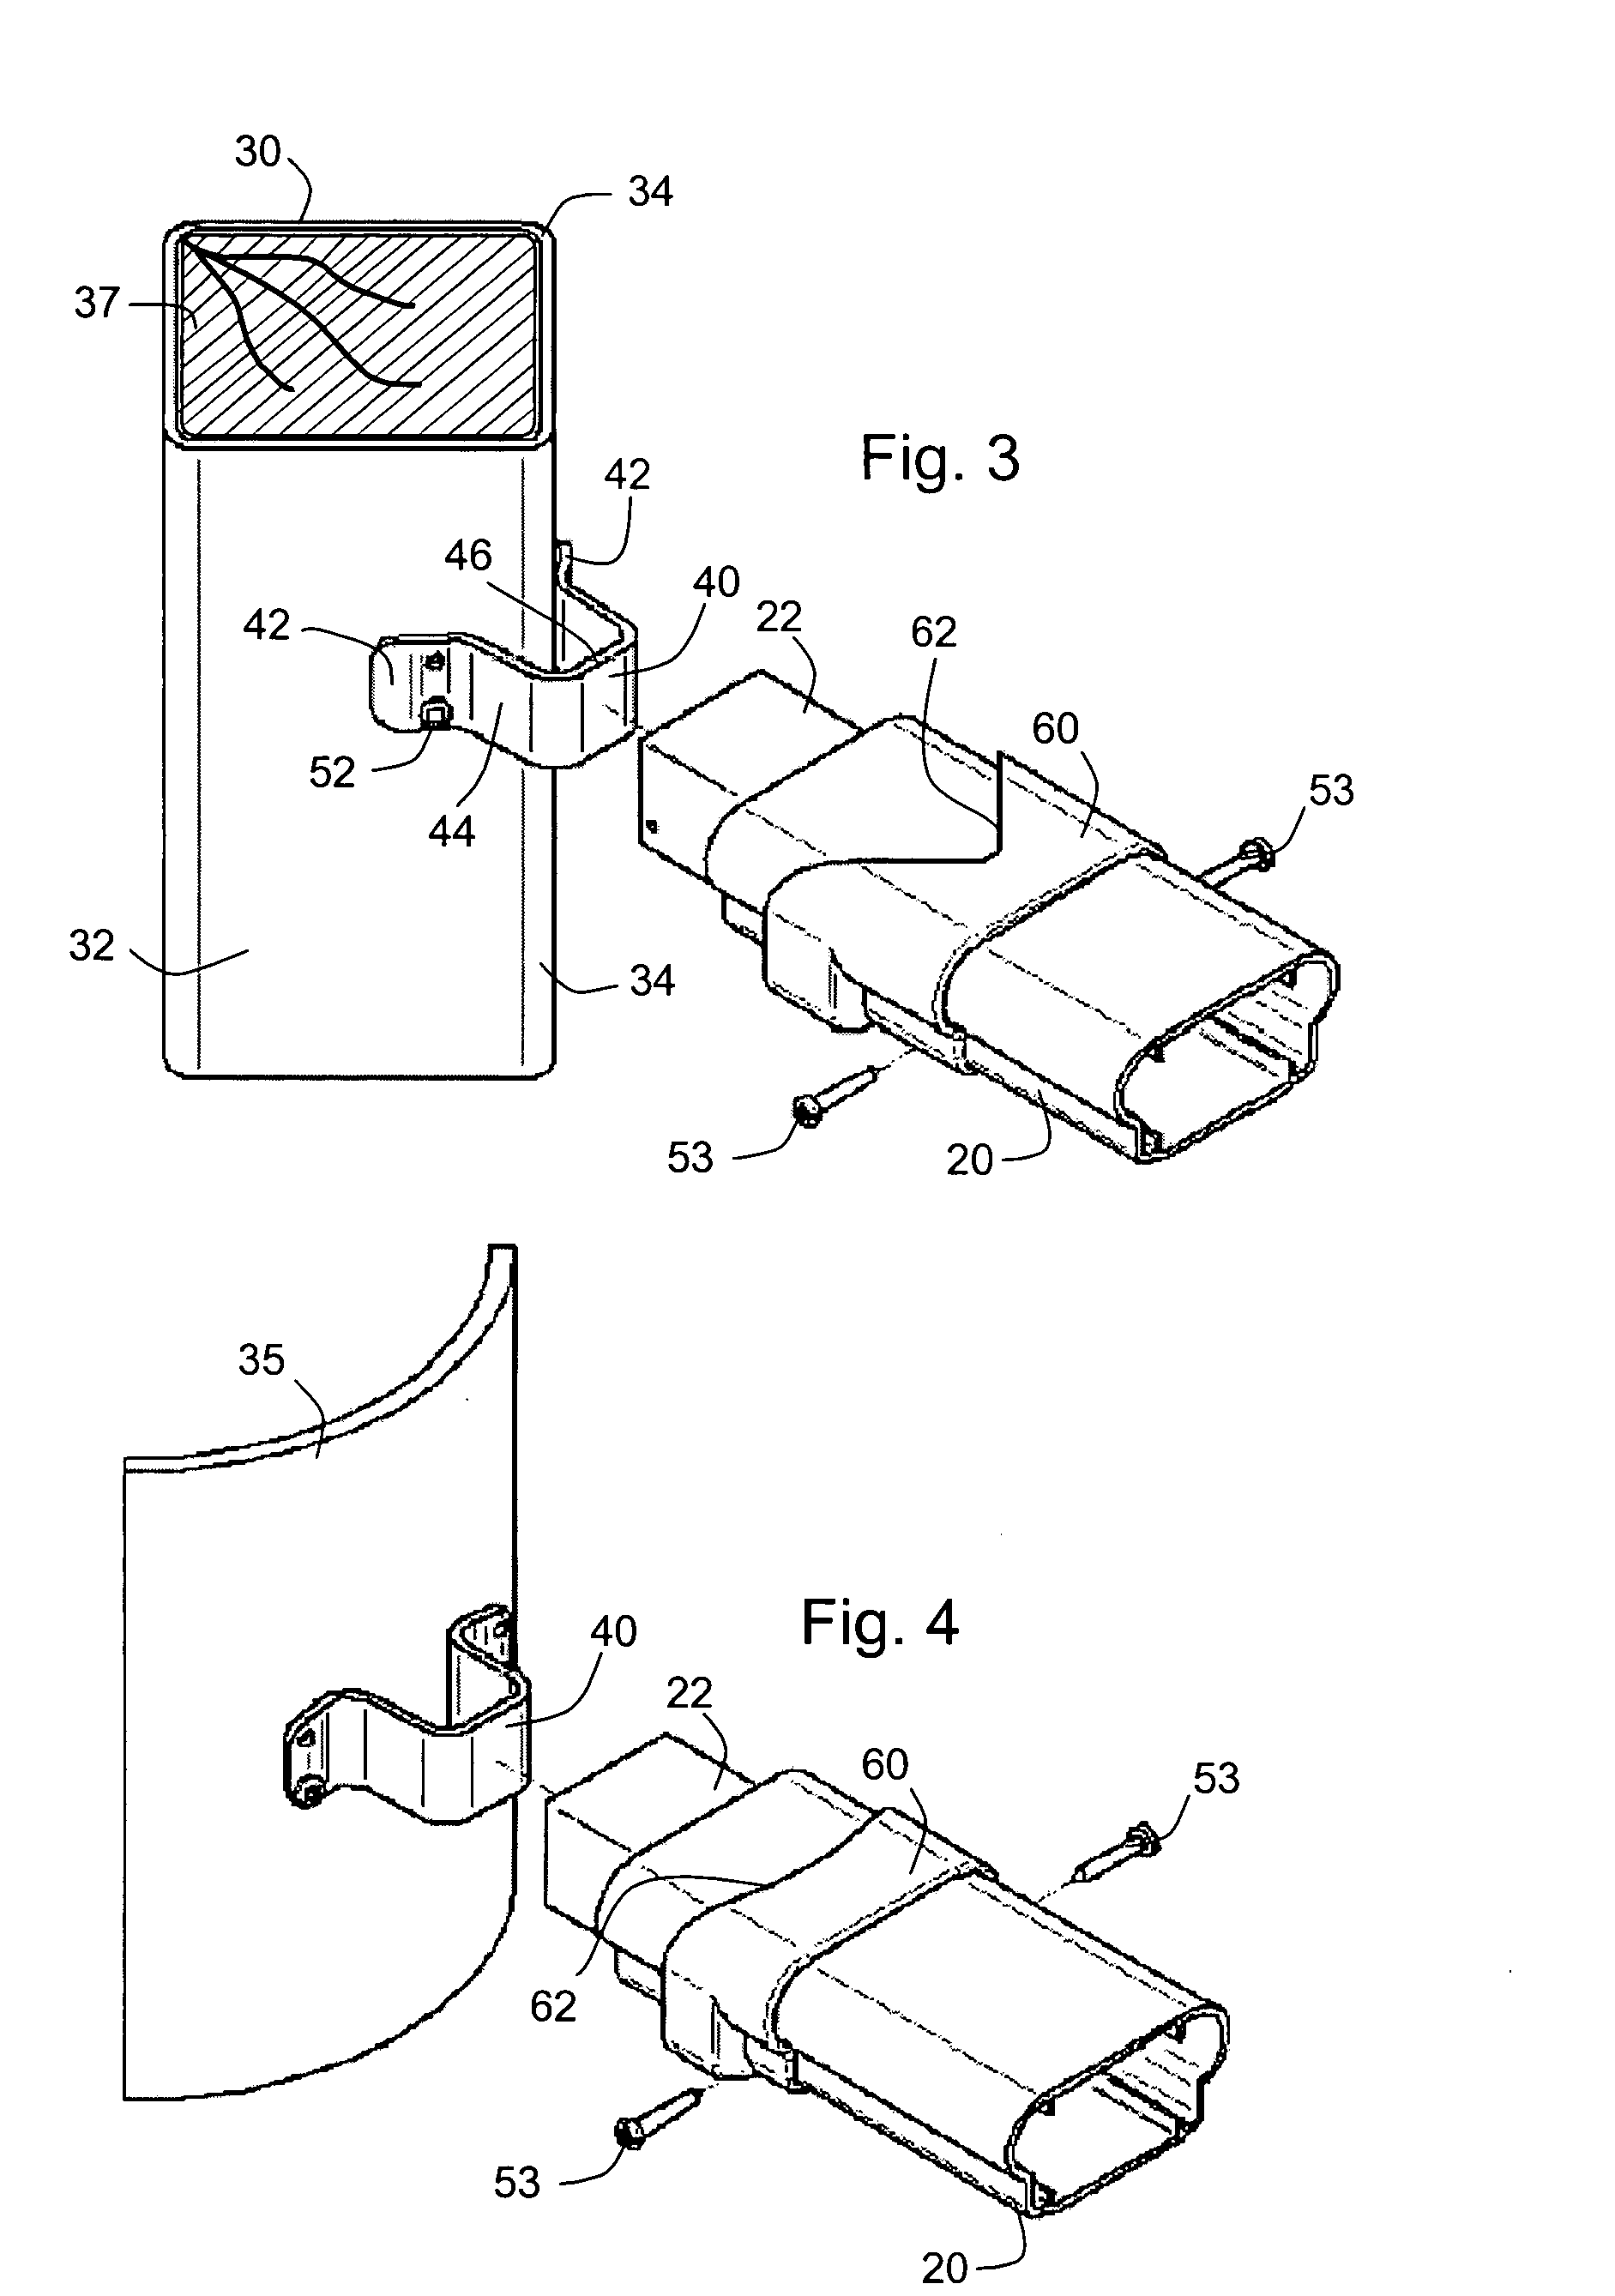 Bracket system for attaching elongated members